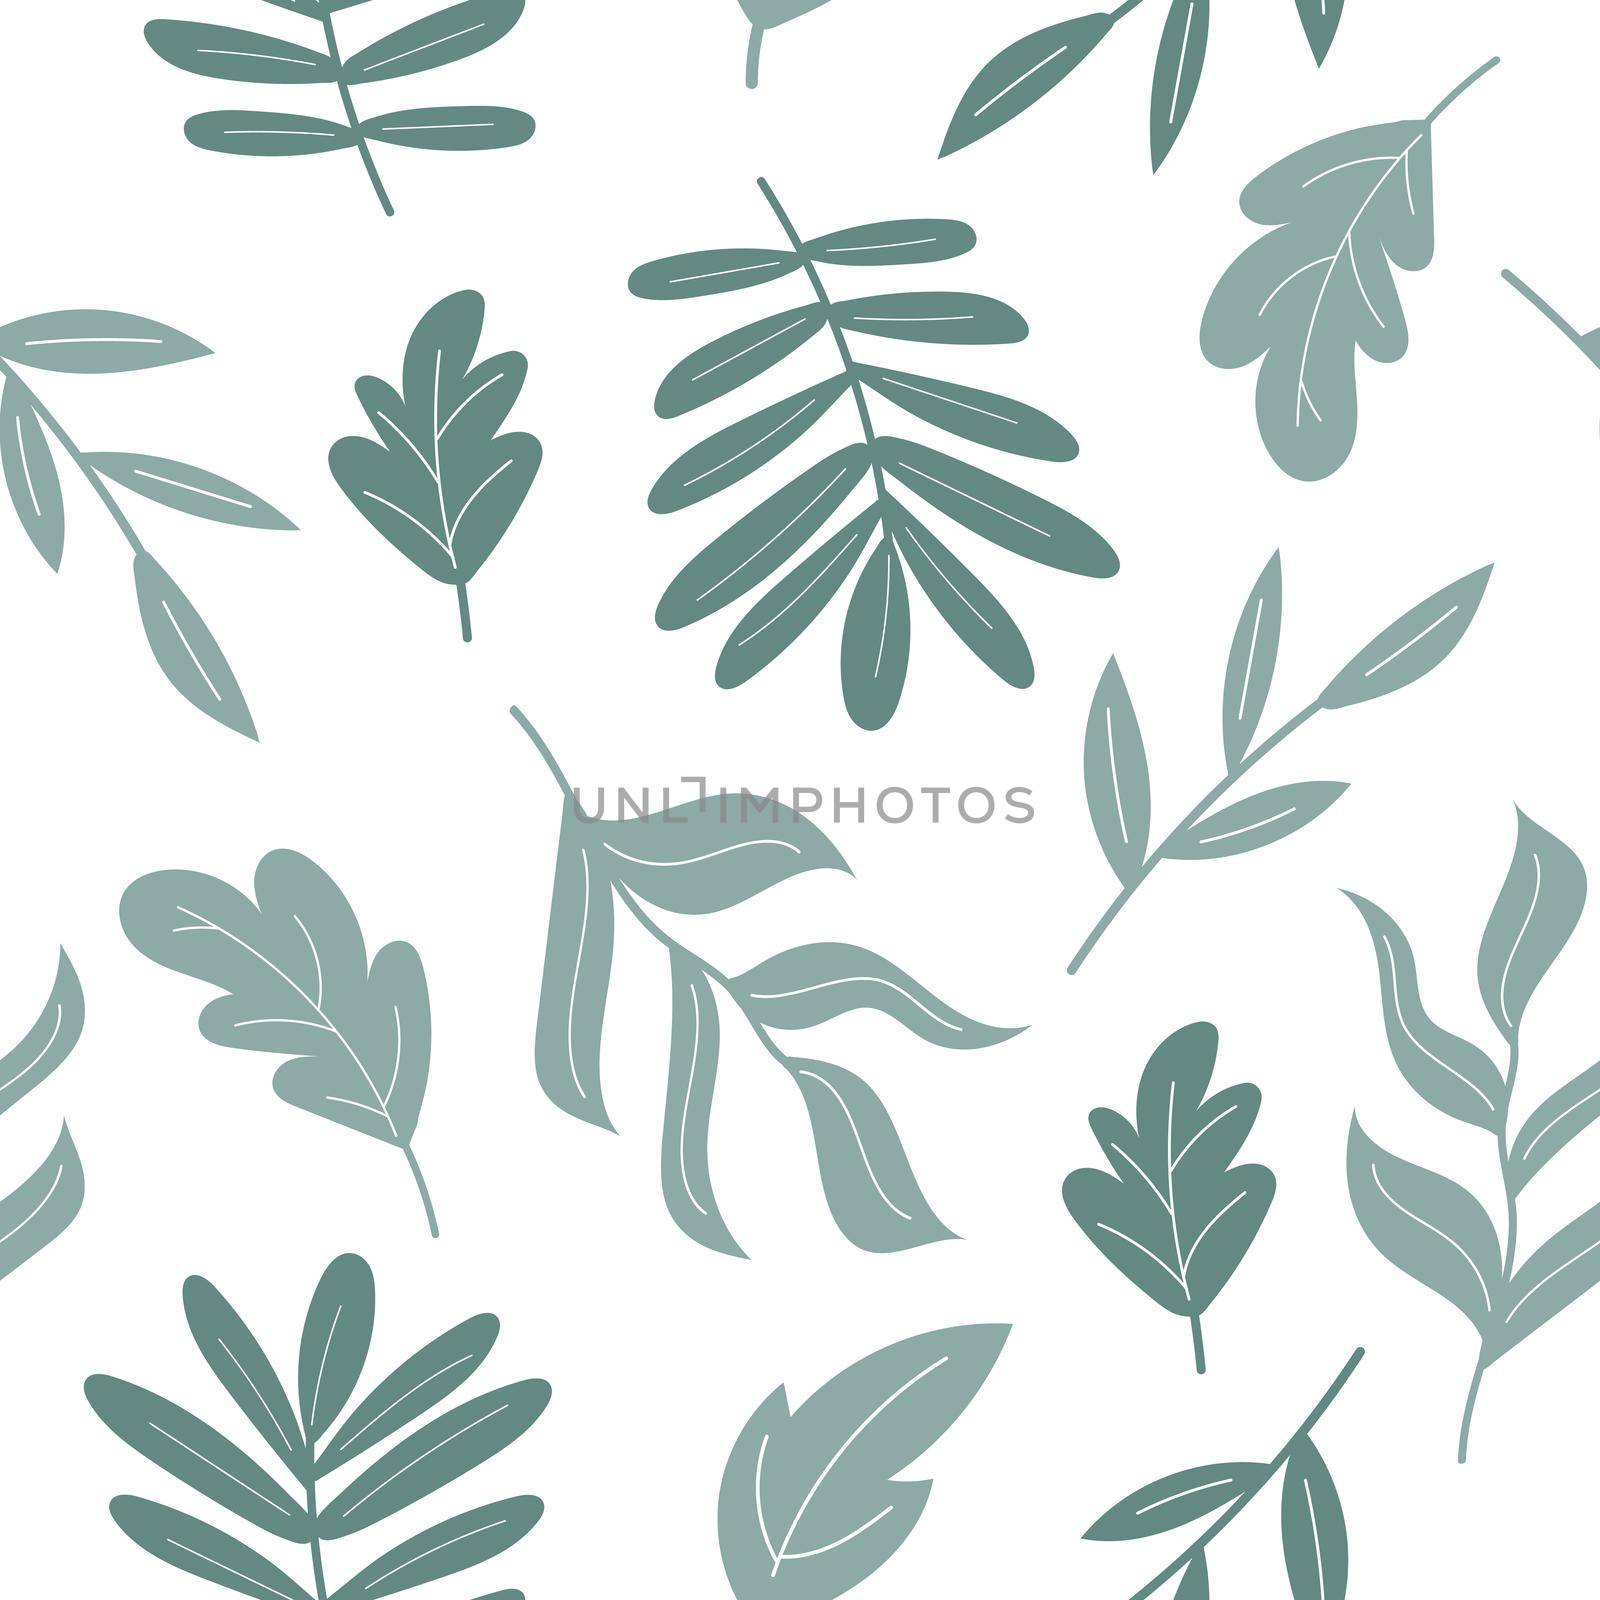 Decorative seamless spring pattern. Endless elegant texture with hand-drawn green leaves. Tempate for design fabric, backgrounds, wrapping paper